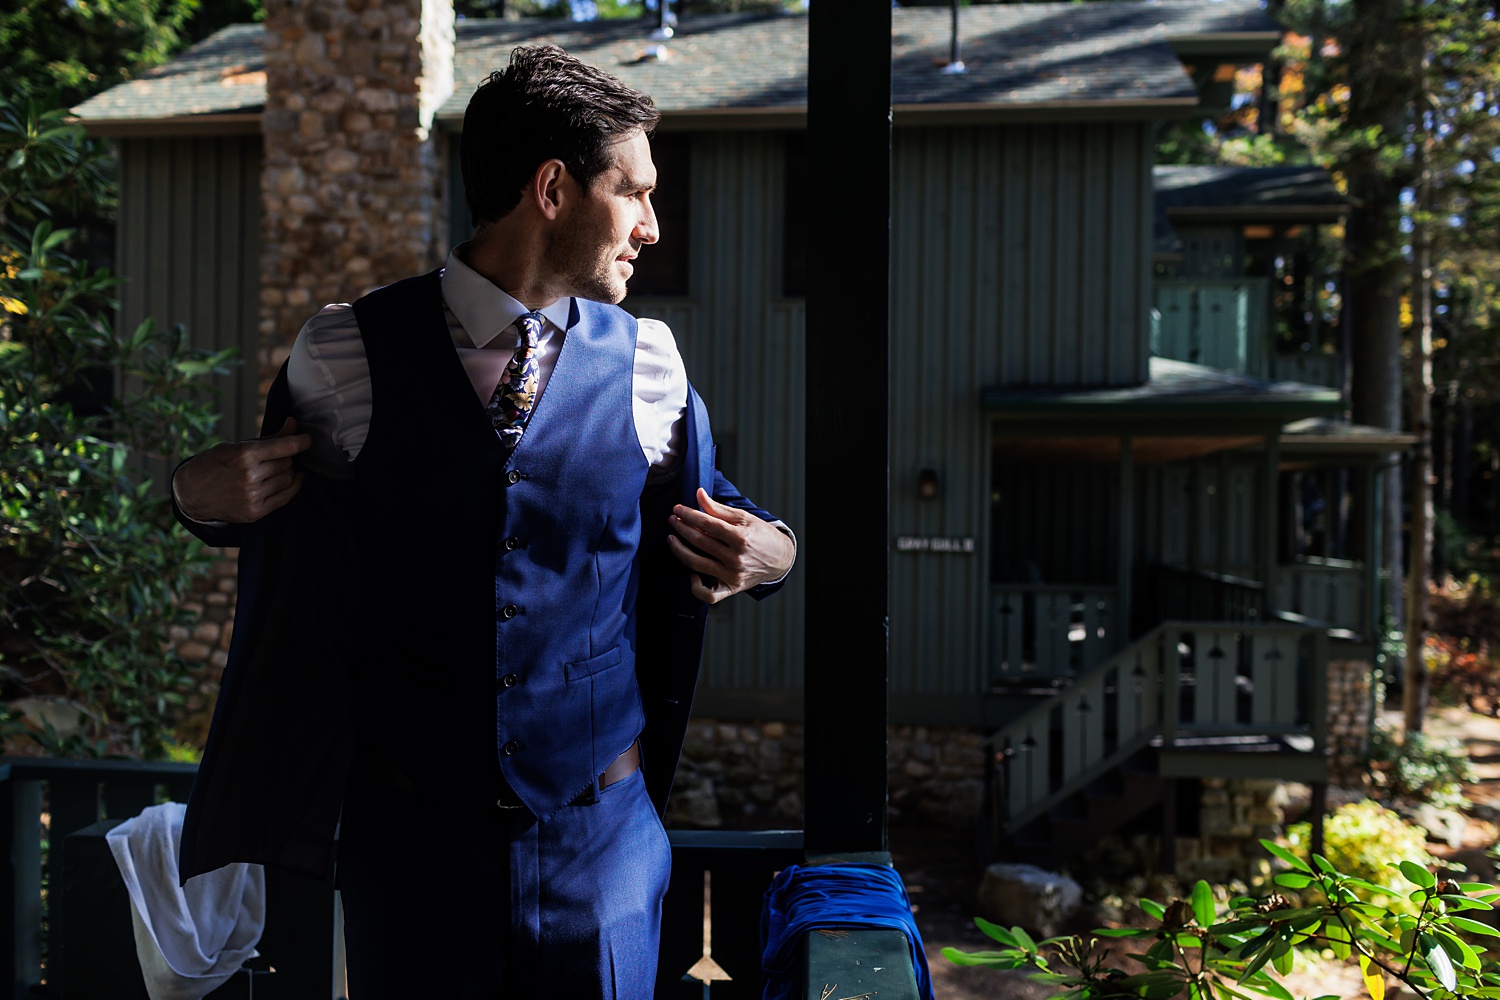 The groom gets ready on the porch of his cabin on his wedding day